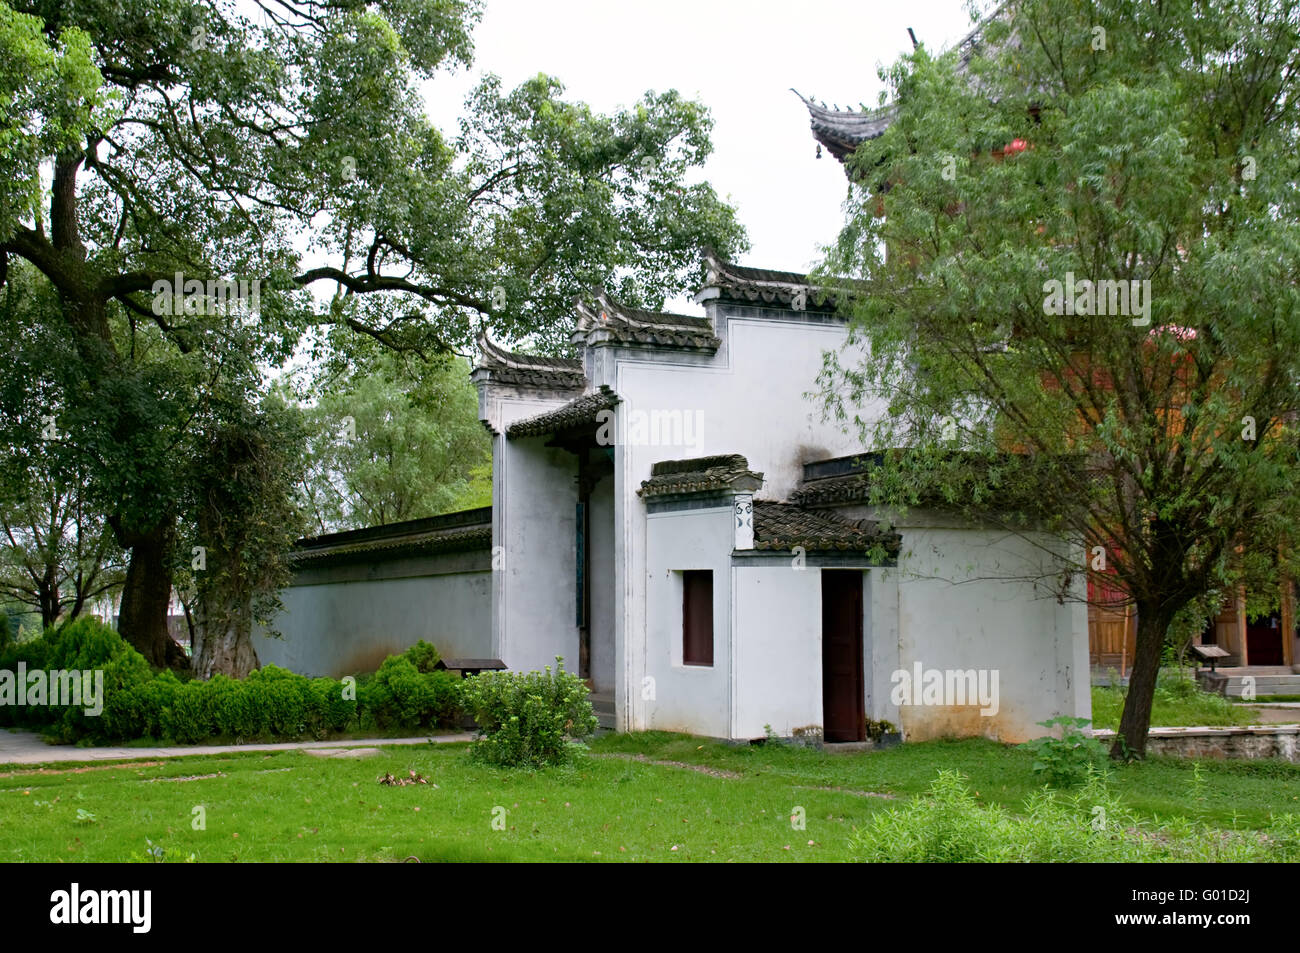 The Chinese architecture with yard and garden Stock Photo